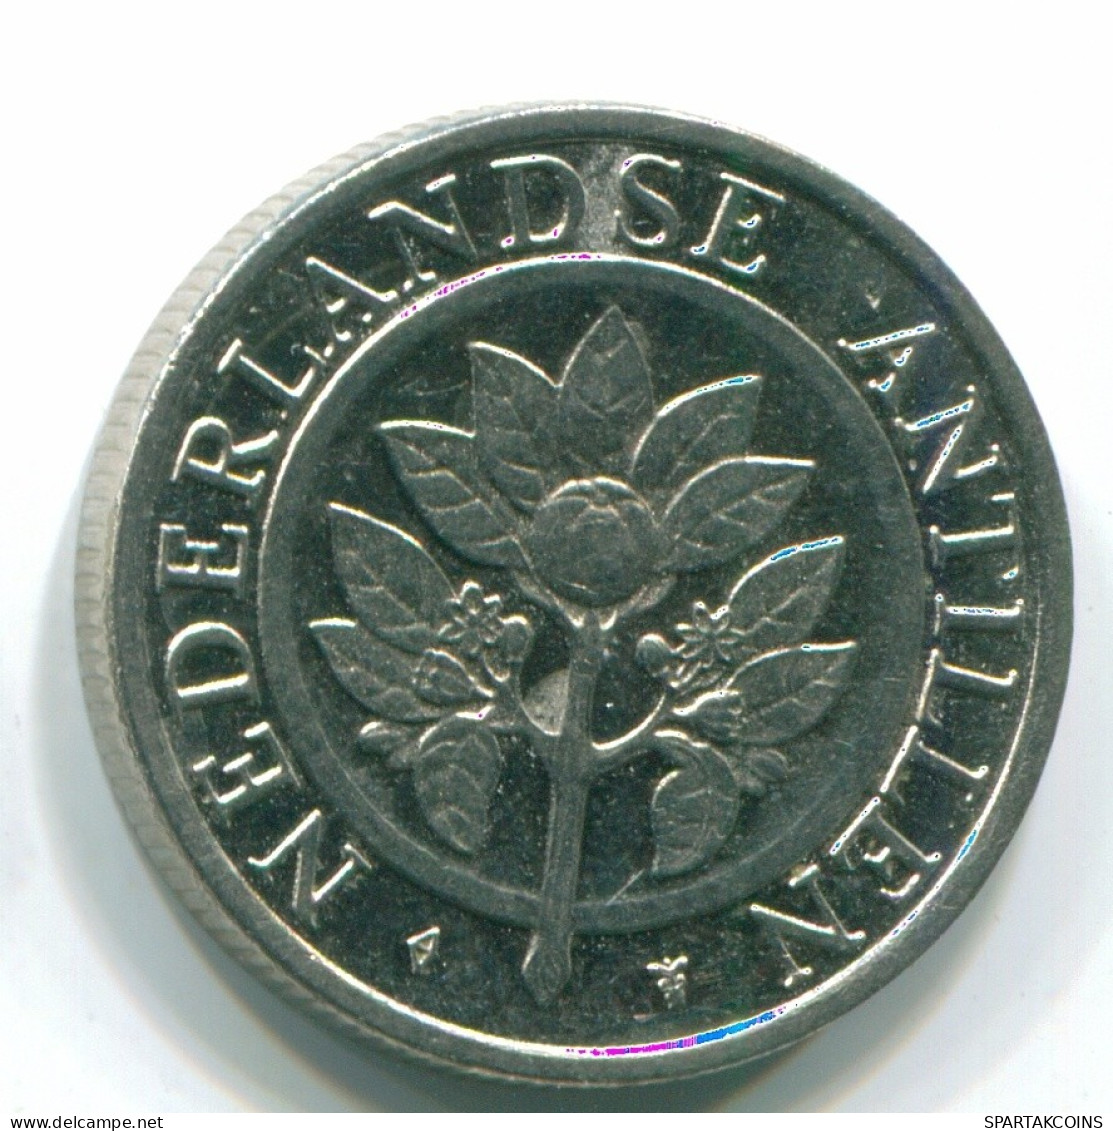 25 CENTS 1993 NETHERLANDS ANTILLES Nickel Colonial Coin #S11291.U.A - Netherlands Antilles